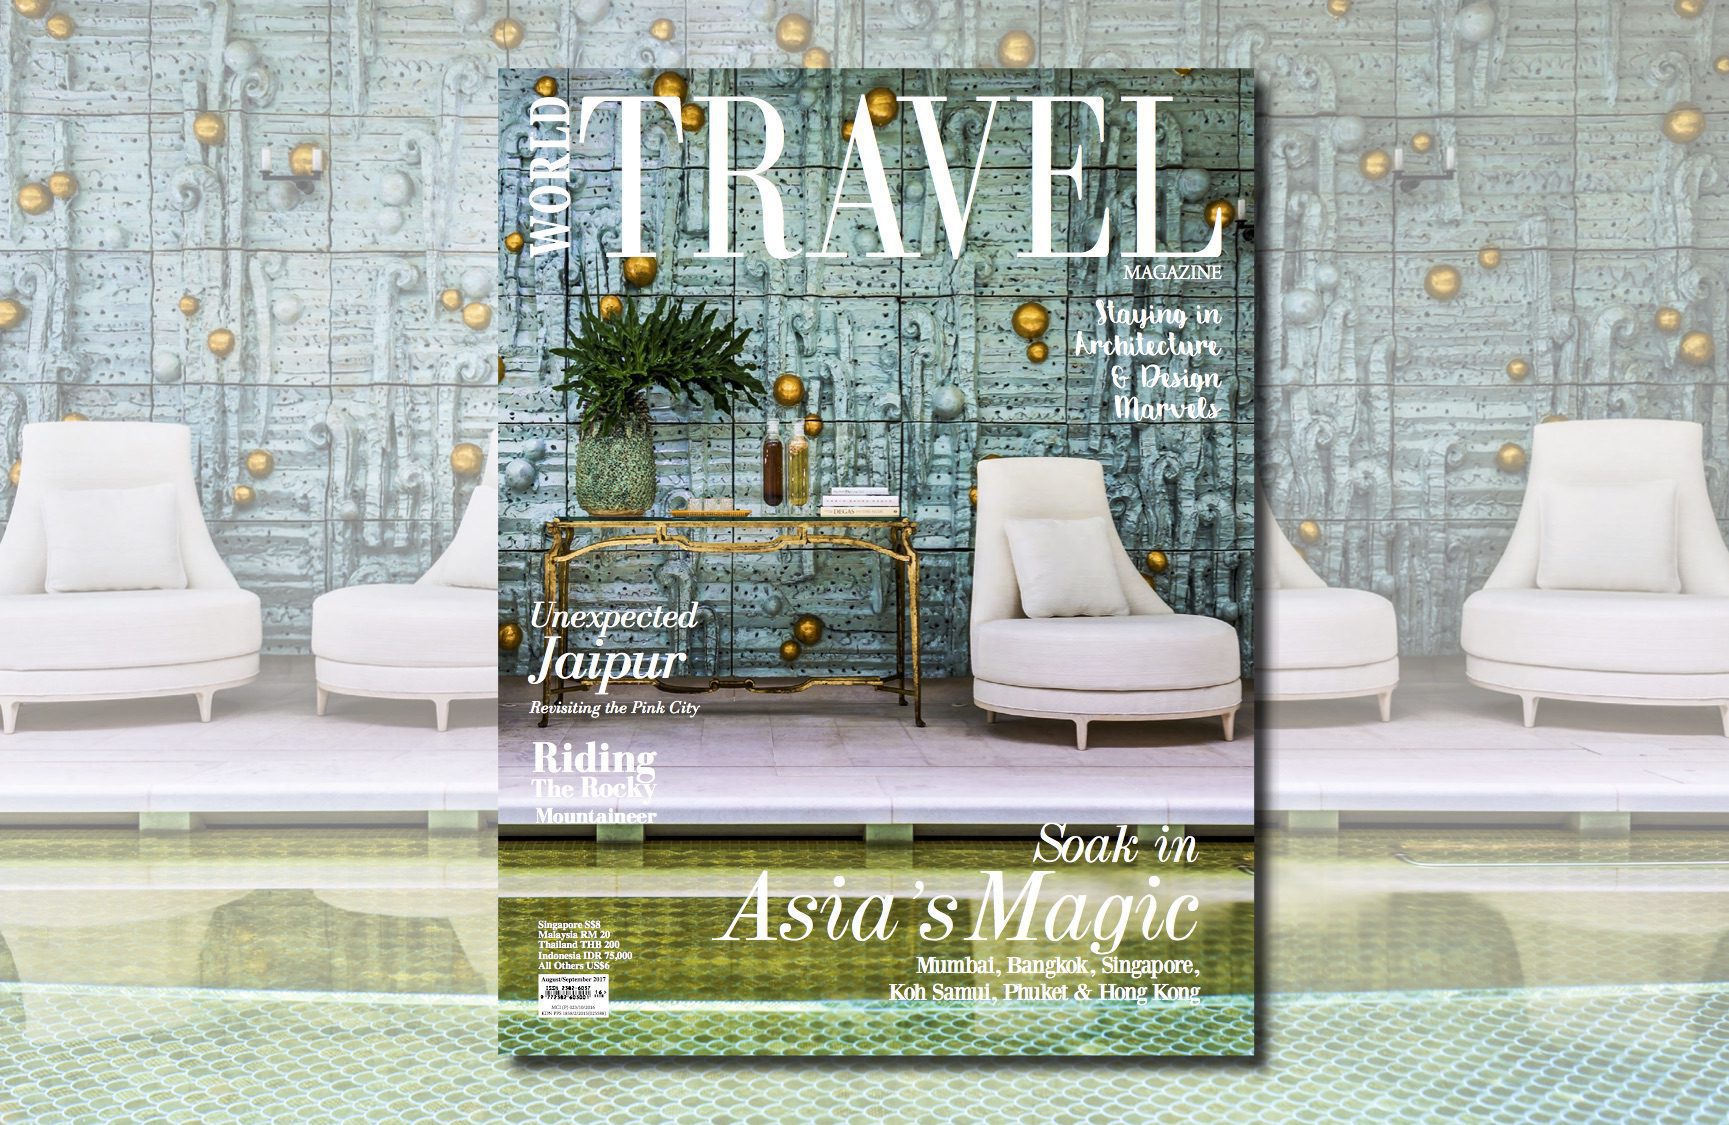 In love with Asia – editor’s note